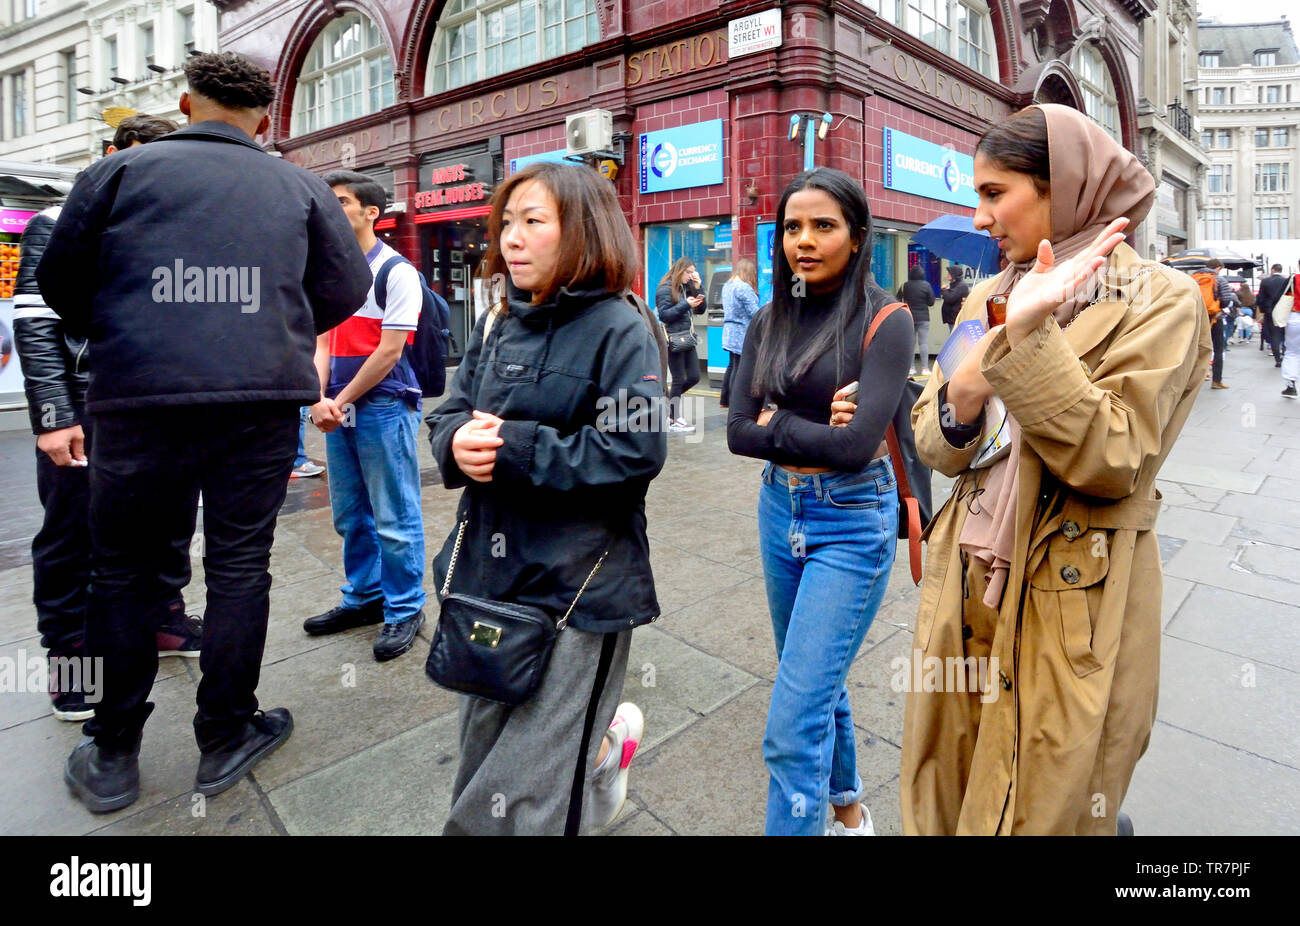 London, England, UK. People of different ethnic minorities shopping in Oxford Street on a rainy day Stock Photo